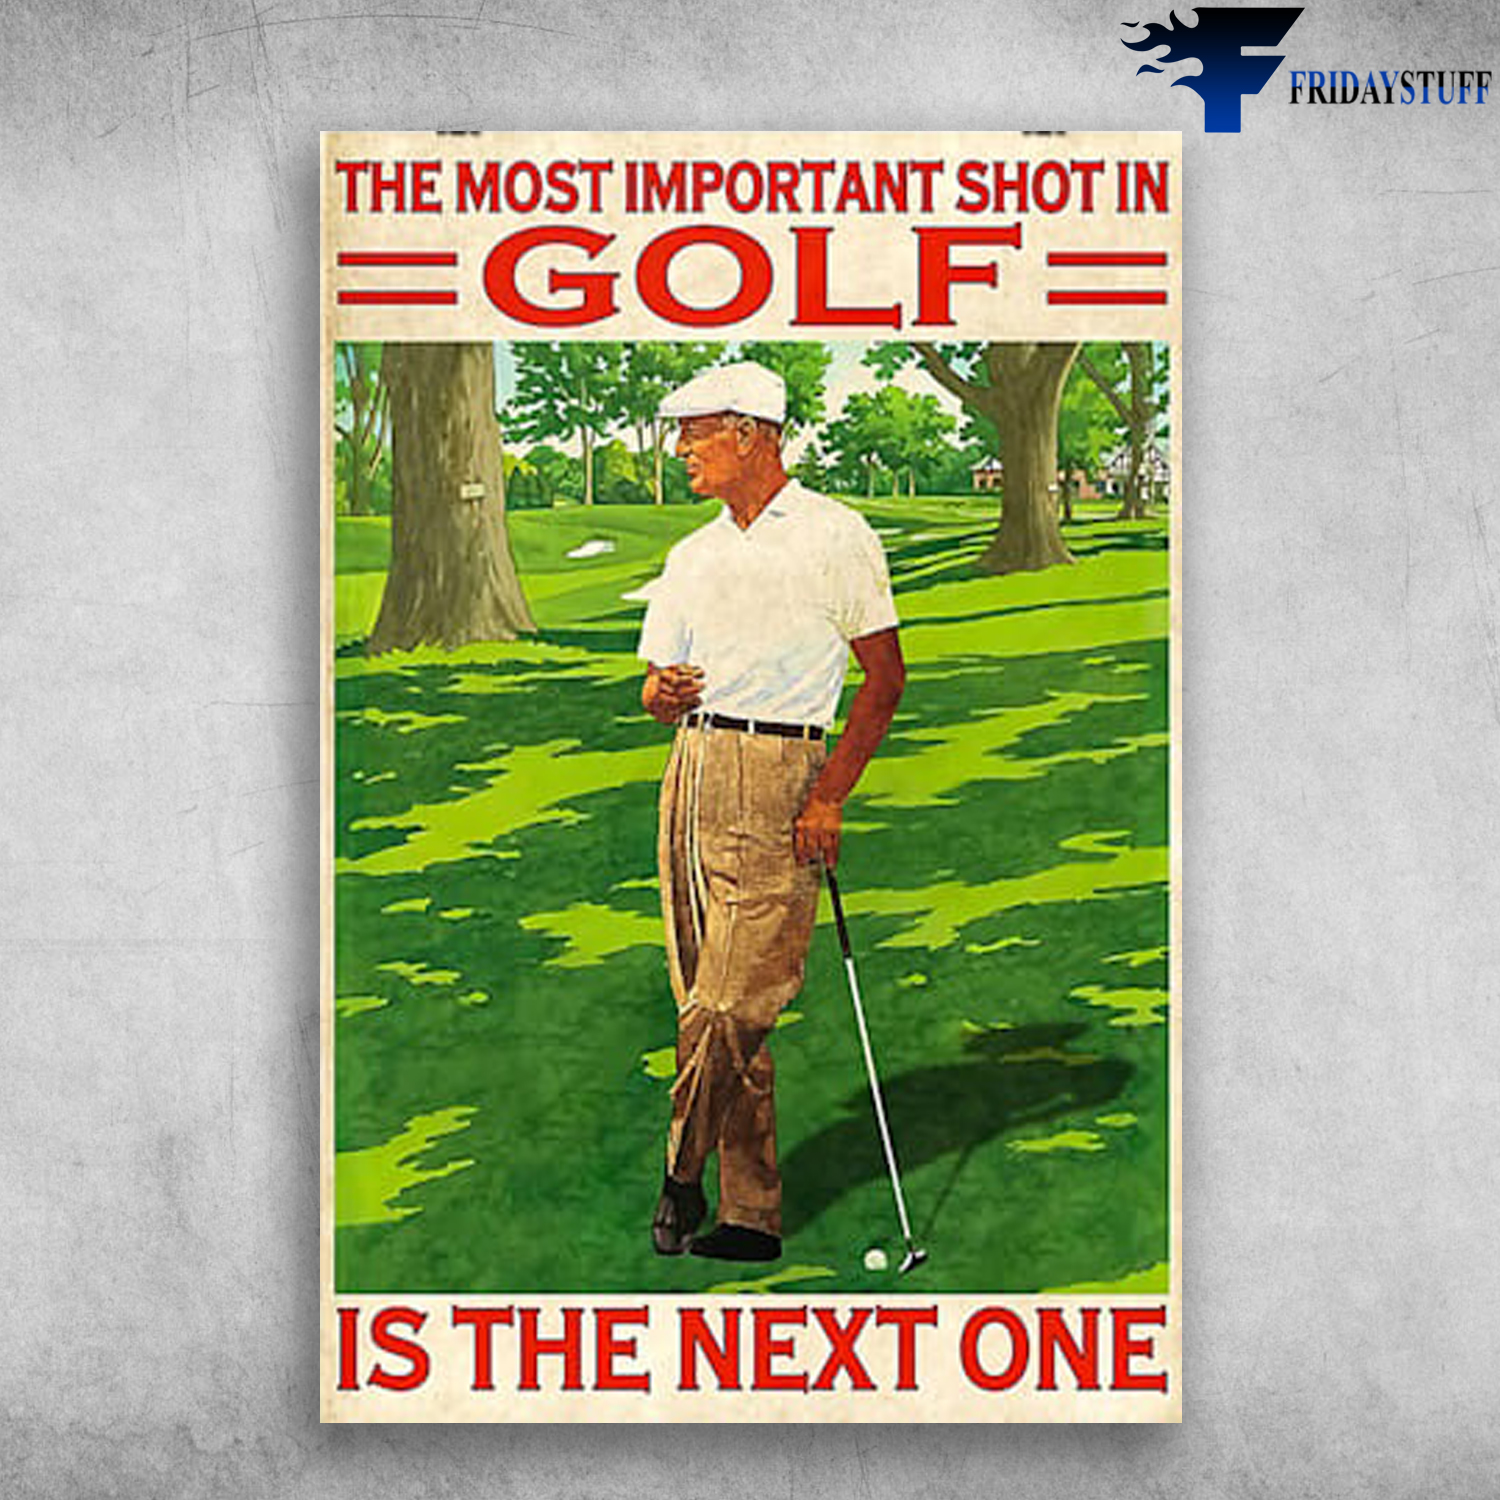 The most important shot in golf is the next one